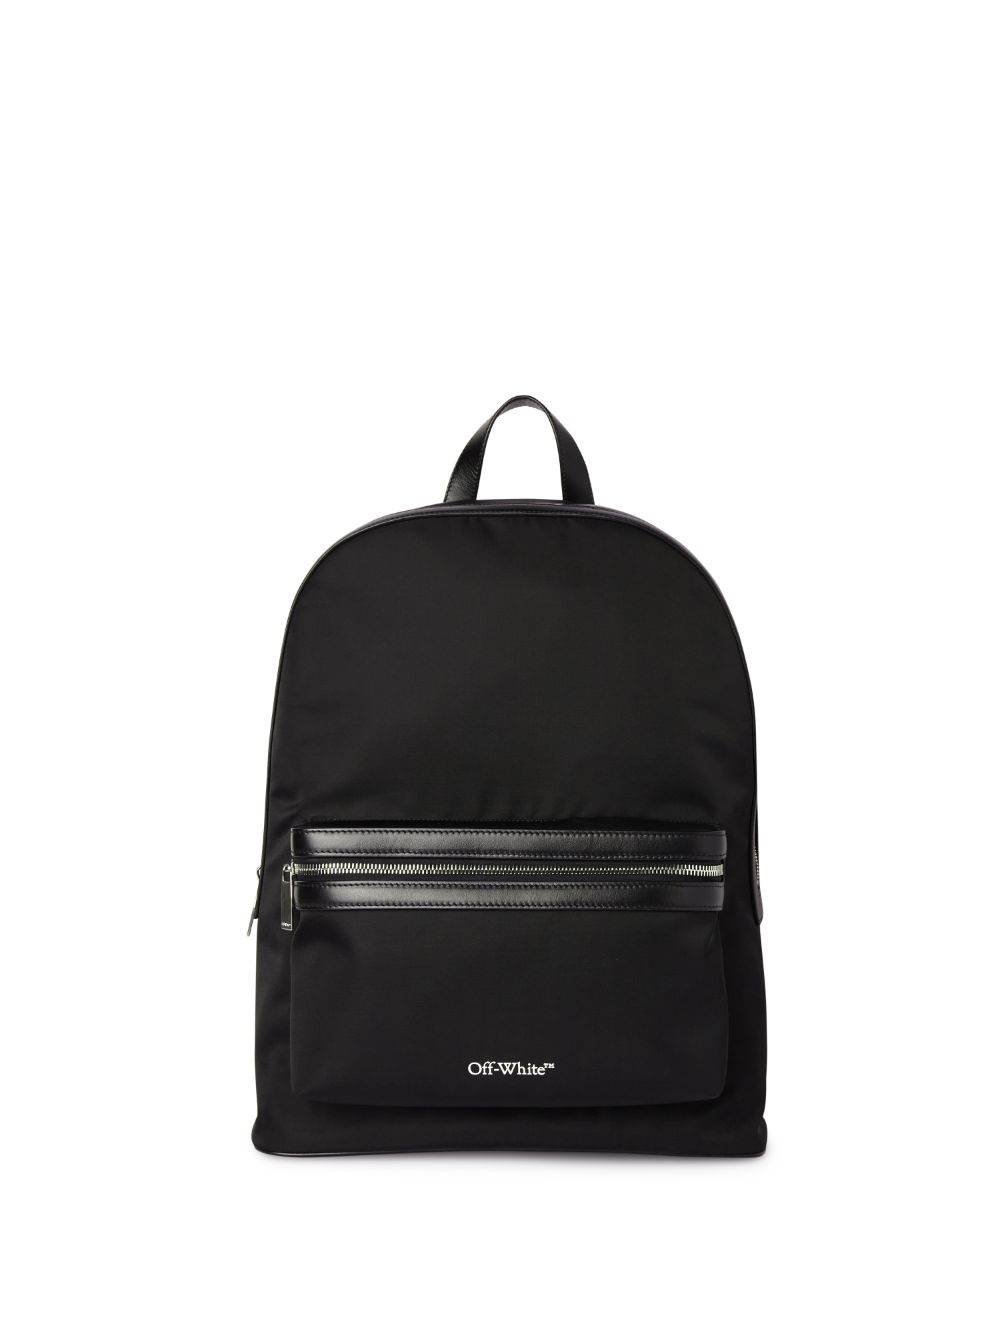 CORE ROUND BACKPACK NYLON in black | Off-White™ Official US